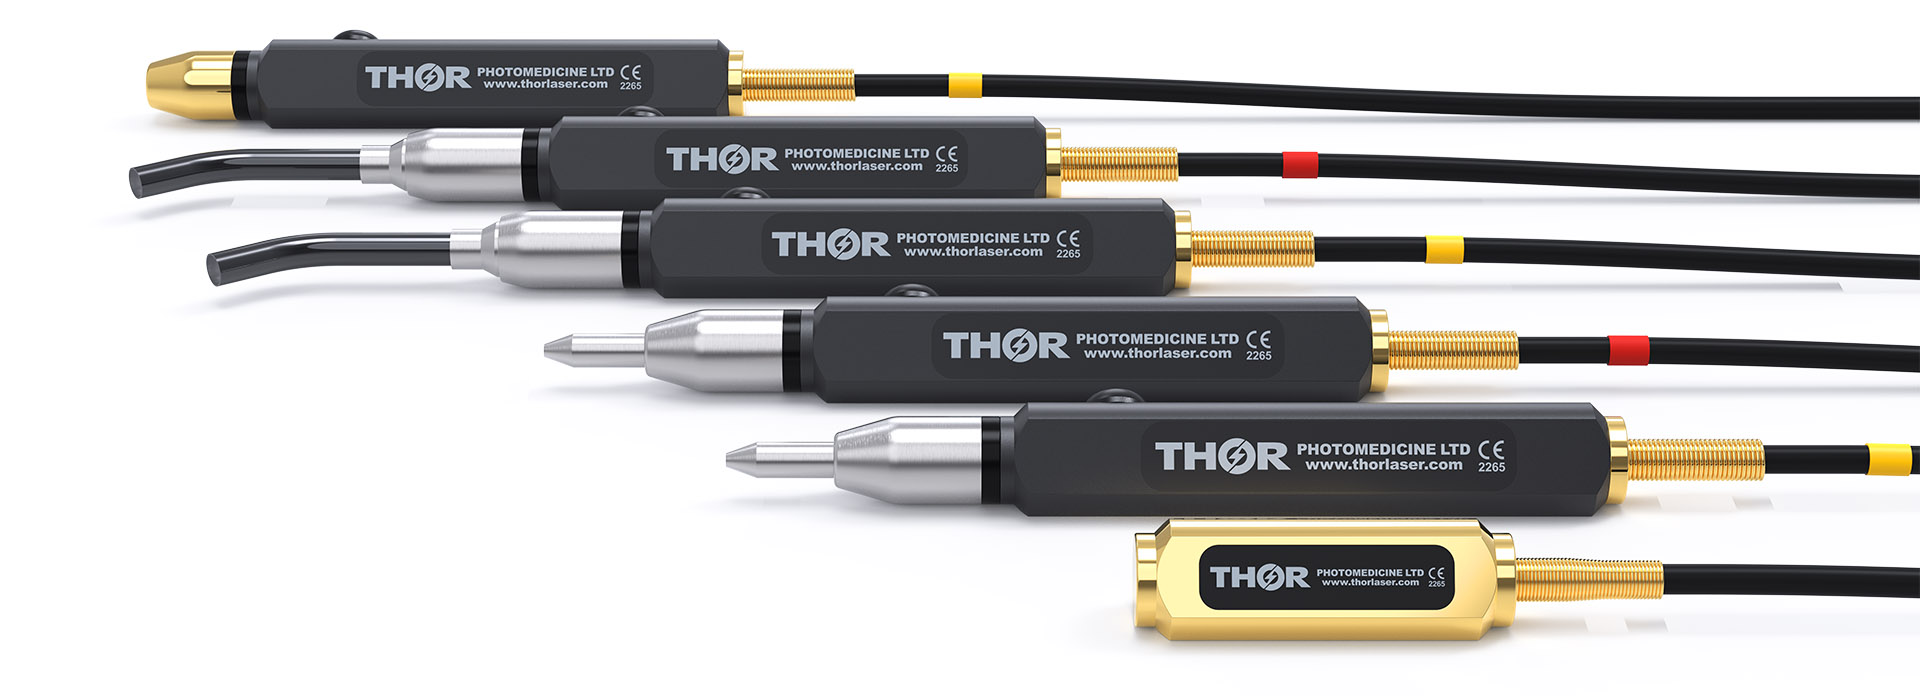 THOR Photomedicine's precise photobiomodulation  treatment probes to be used with the LX2